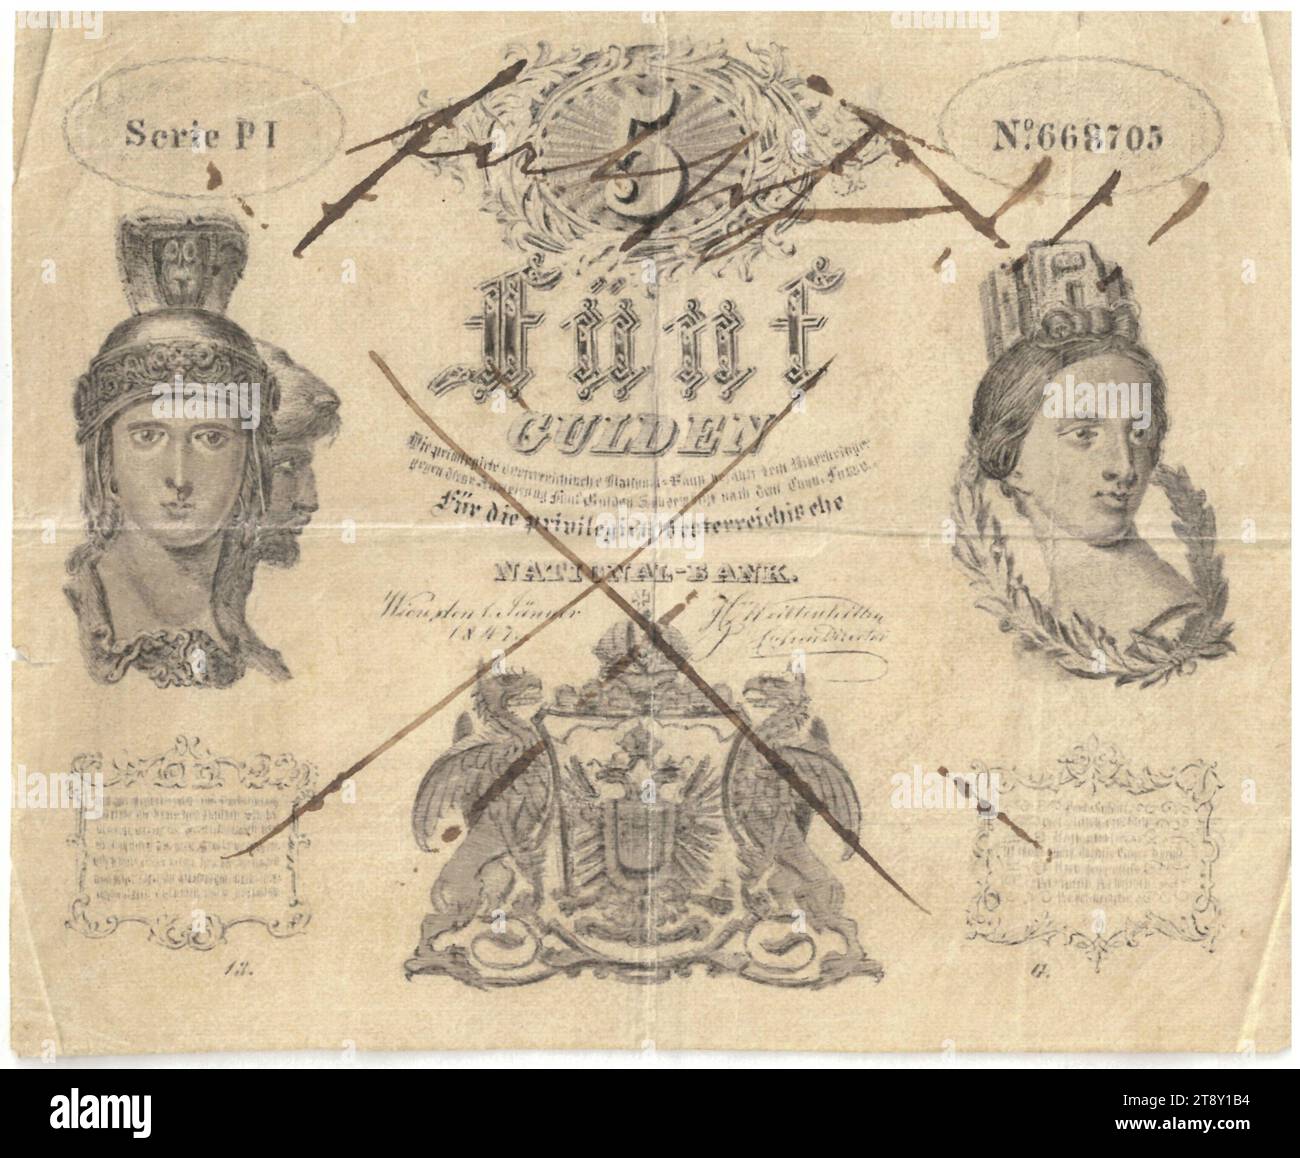 Instruction (counterfeit), 5 florins, Privilegierte Österreichische National-Bank, mint authority, Date after 01.01.1847, paper, printing, height 107 mm, width 131 mm, Mint, Vienna, Mint territory, Austria, Empire (1804-1867), Finance, counterfeit, forgery, coat of arms (as symbol of the state, etc.), woman, helmet, bank-note, money, The Vienna Collection Stock Photo